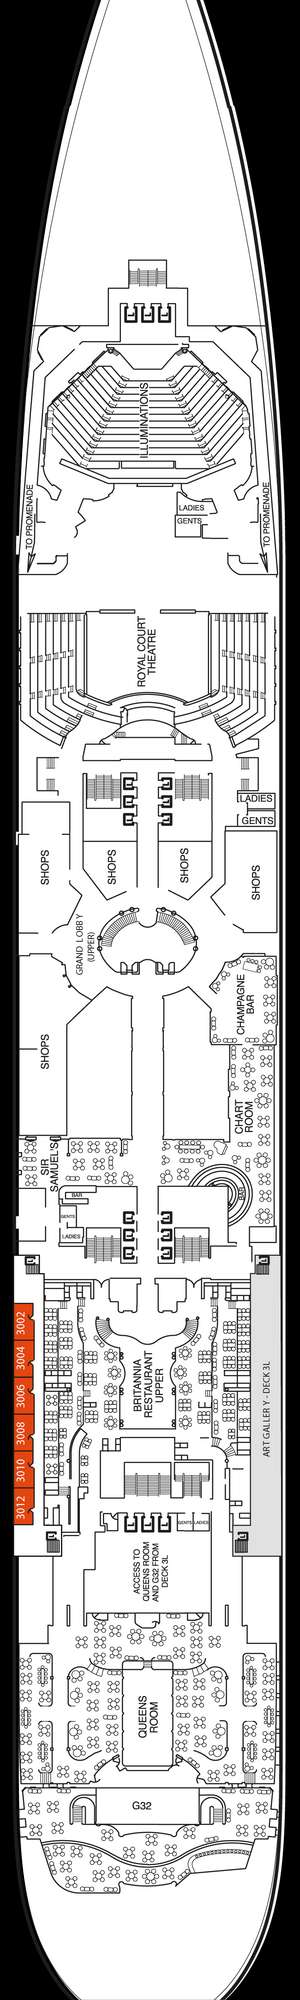 Deck plan for Queen Mary 2